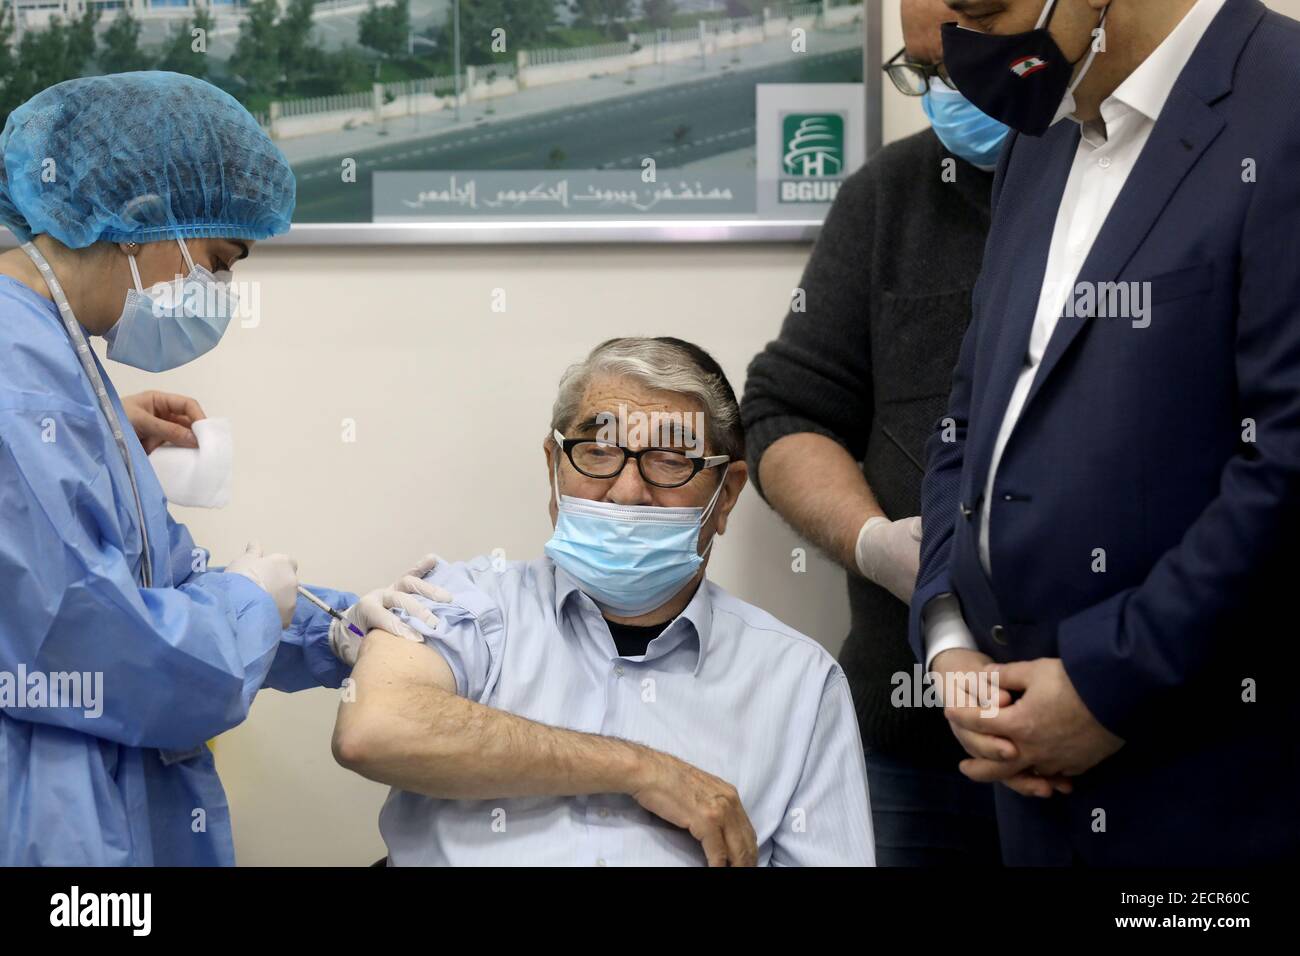 Salah Tizani, 92, known as Abou Salim and one of Lebanon?s first TV celebrities, receives a dose of the Pfizer/BioNTech vaccine against the coronavirus disease (COVID-19) during a coronavirus vaccination campaign at Rafik Hariri University Hospital, in Beirut, Lebanon February 14, 2021. REUTERS/Mohamed Azakir Stock Photo